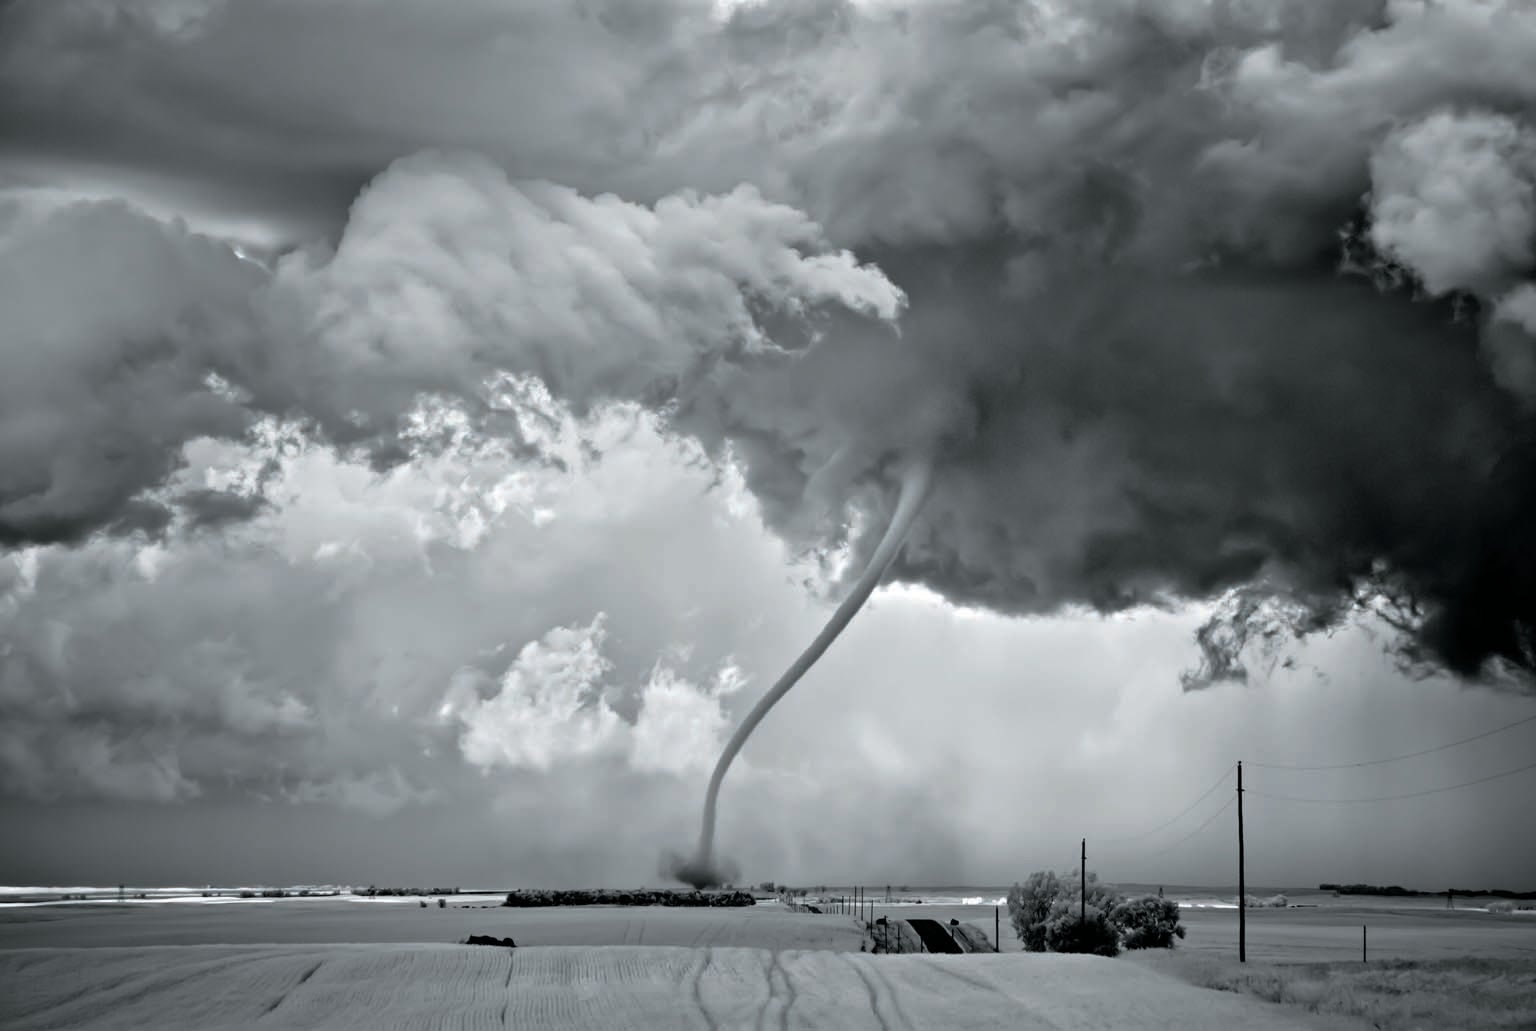 Black and white image of a twister.